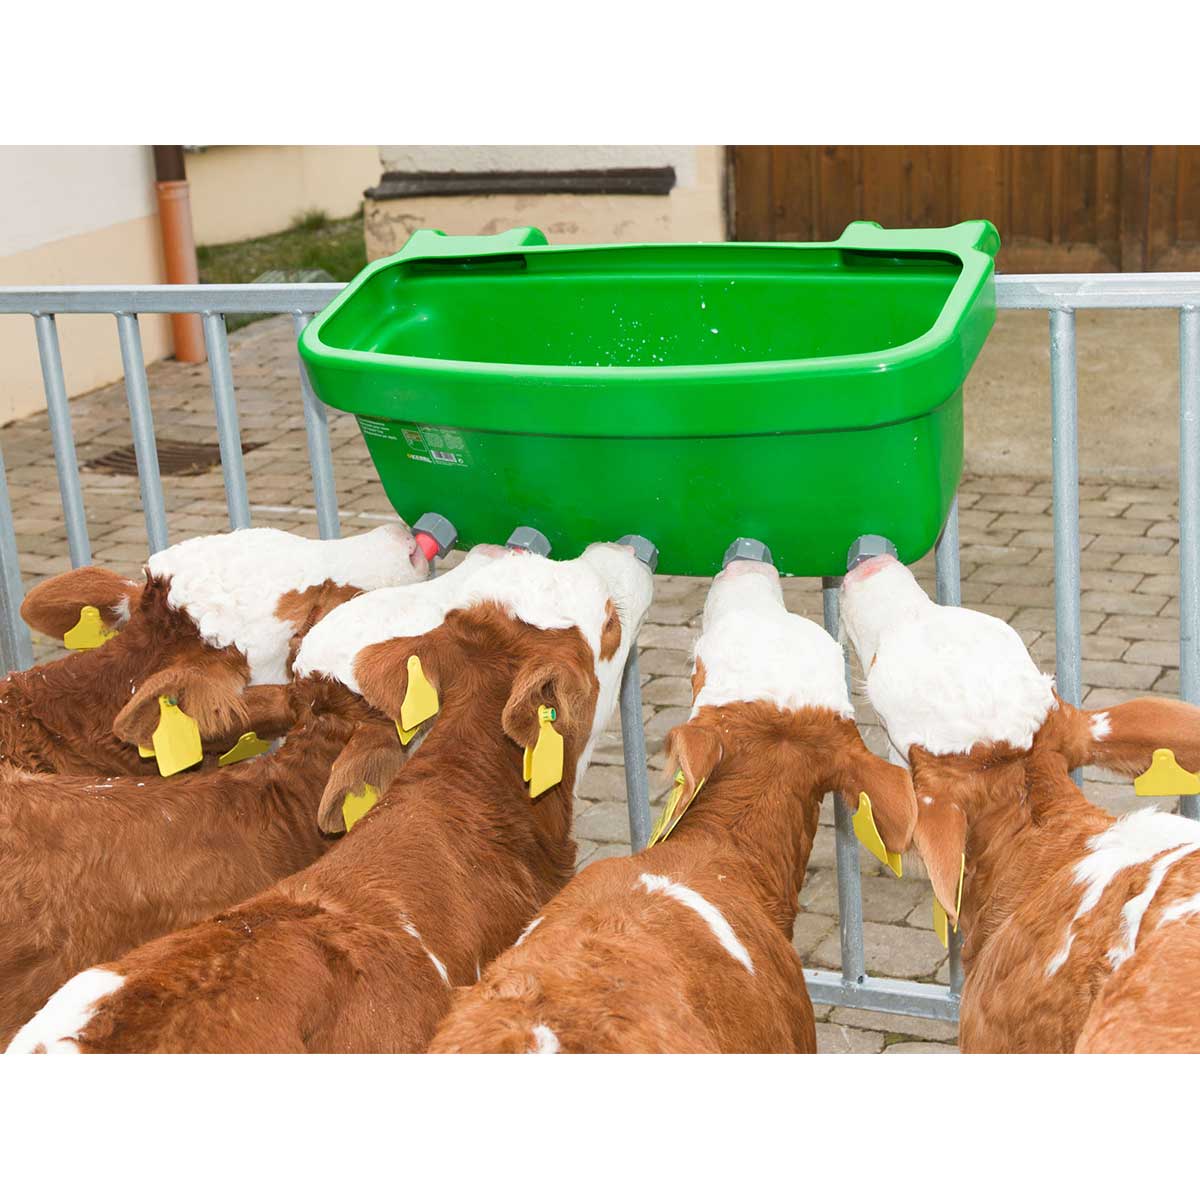 Calf Feeder Tray Multi Feeder with Valve 149 and Super Teat 147